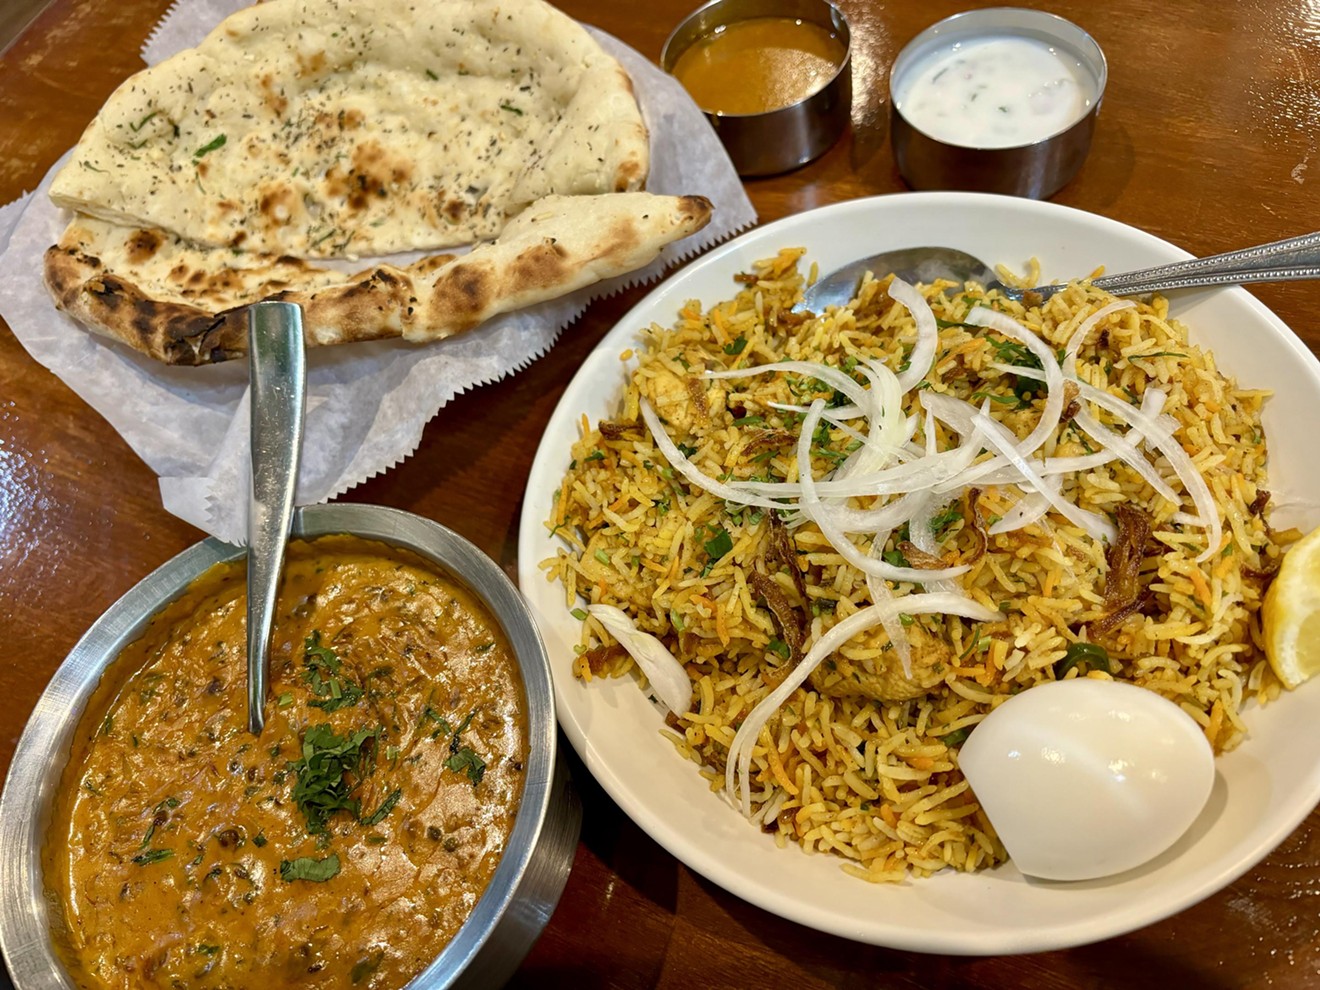 Vayal's Indian Kitchen serves a wide variety of classic and unusual Indian dishes. If you're unsure what to order, friendly servers are ready to help.